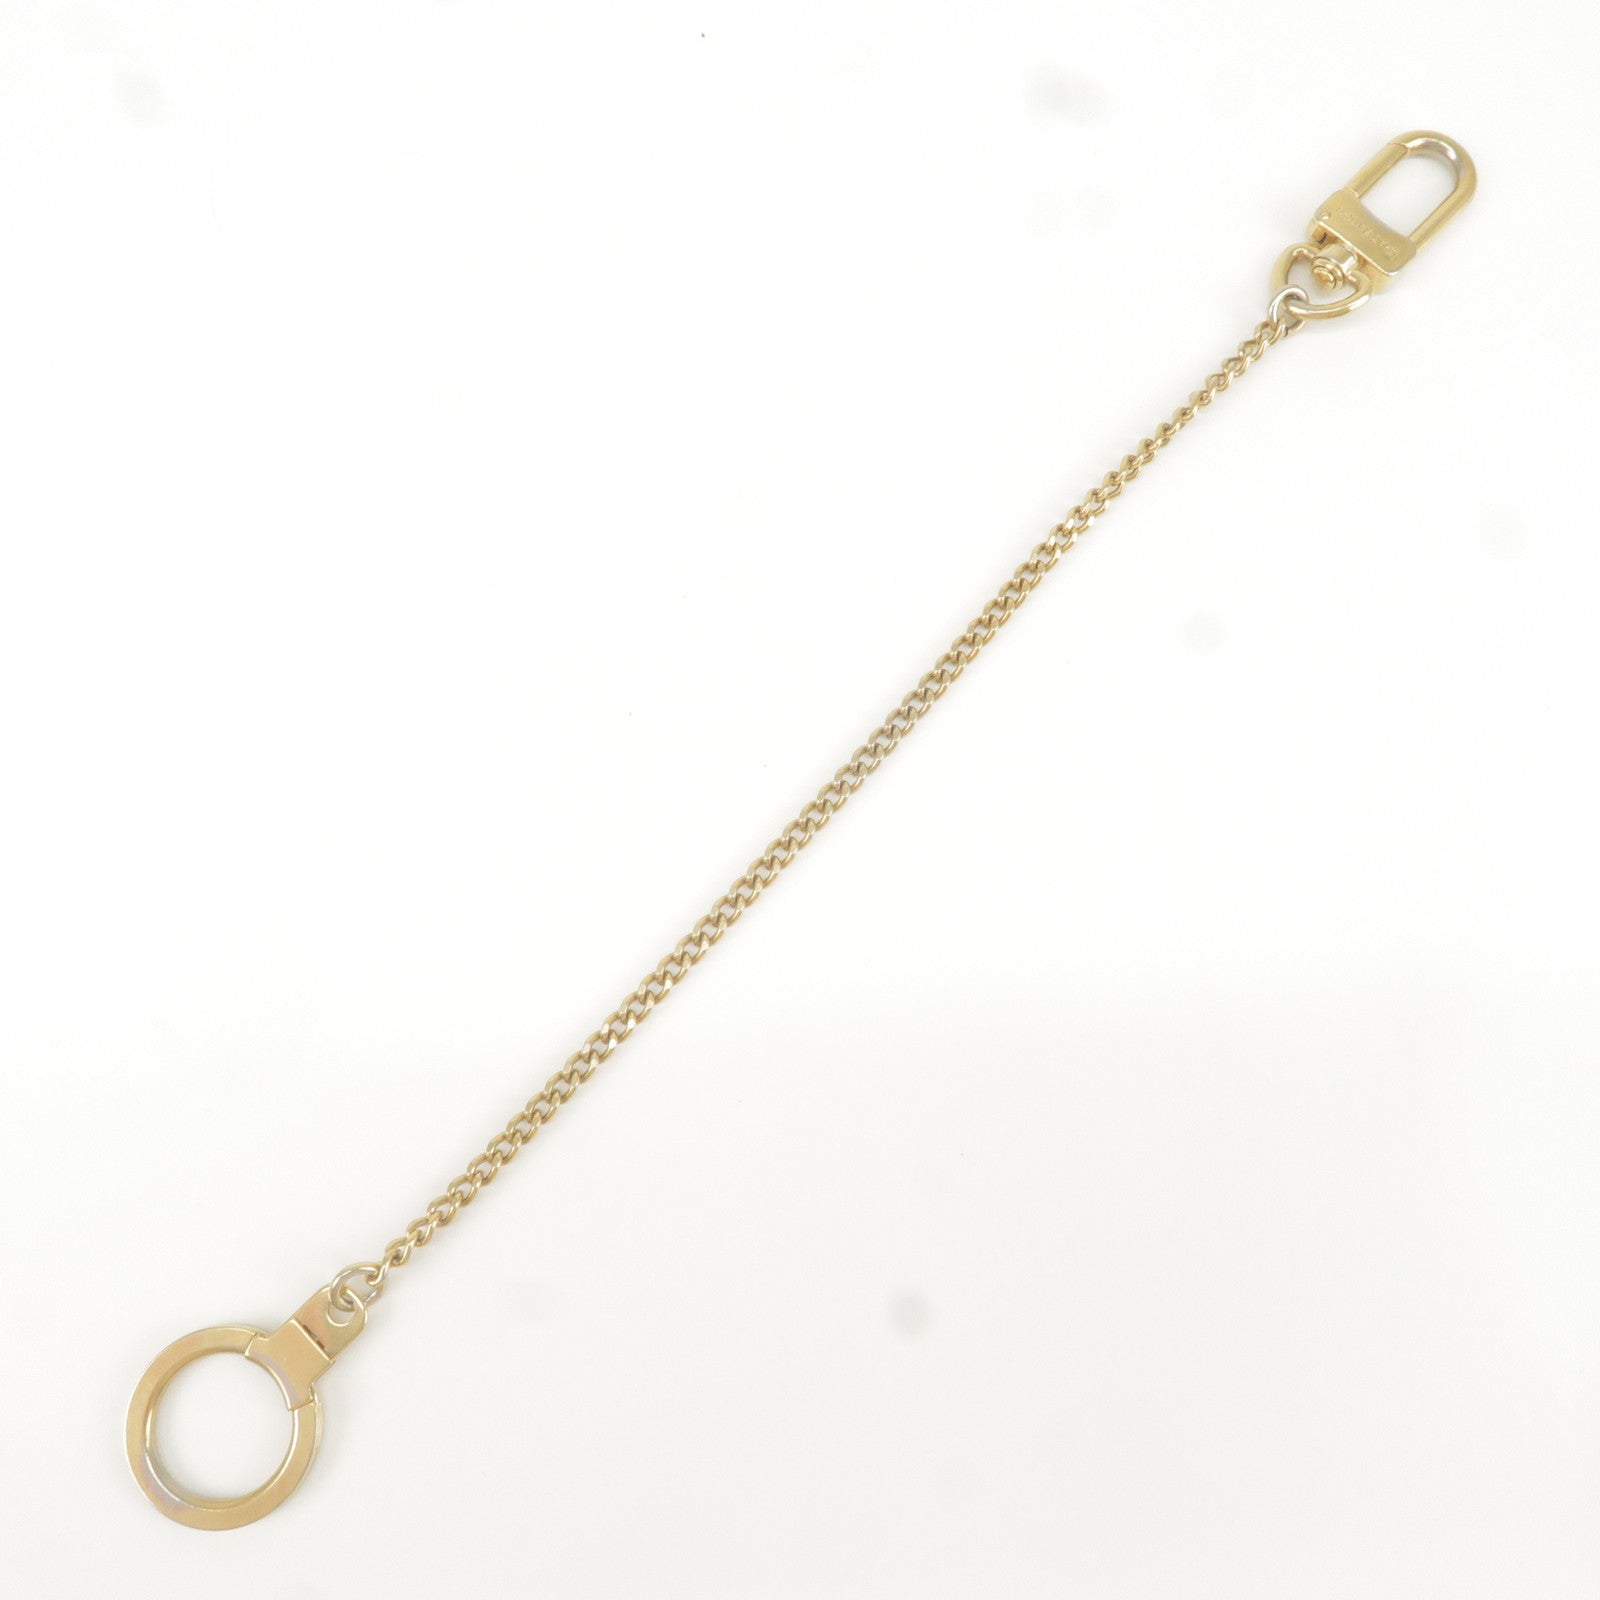 Buy Petite Chain Strap Extender Accessory for LV Pochette & More Online in  India 